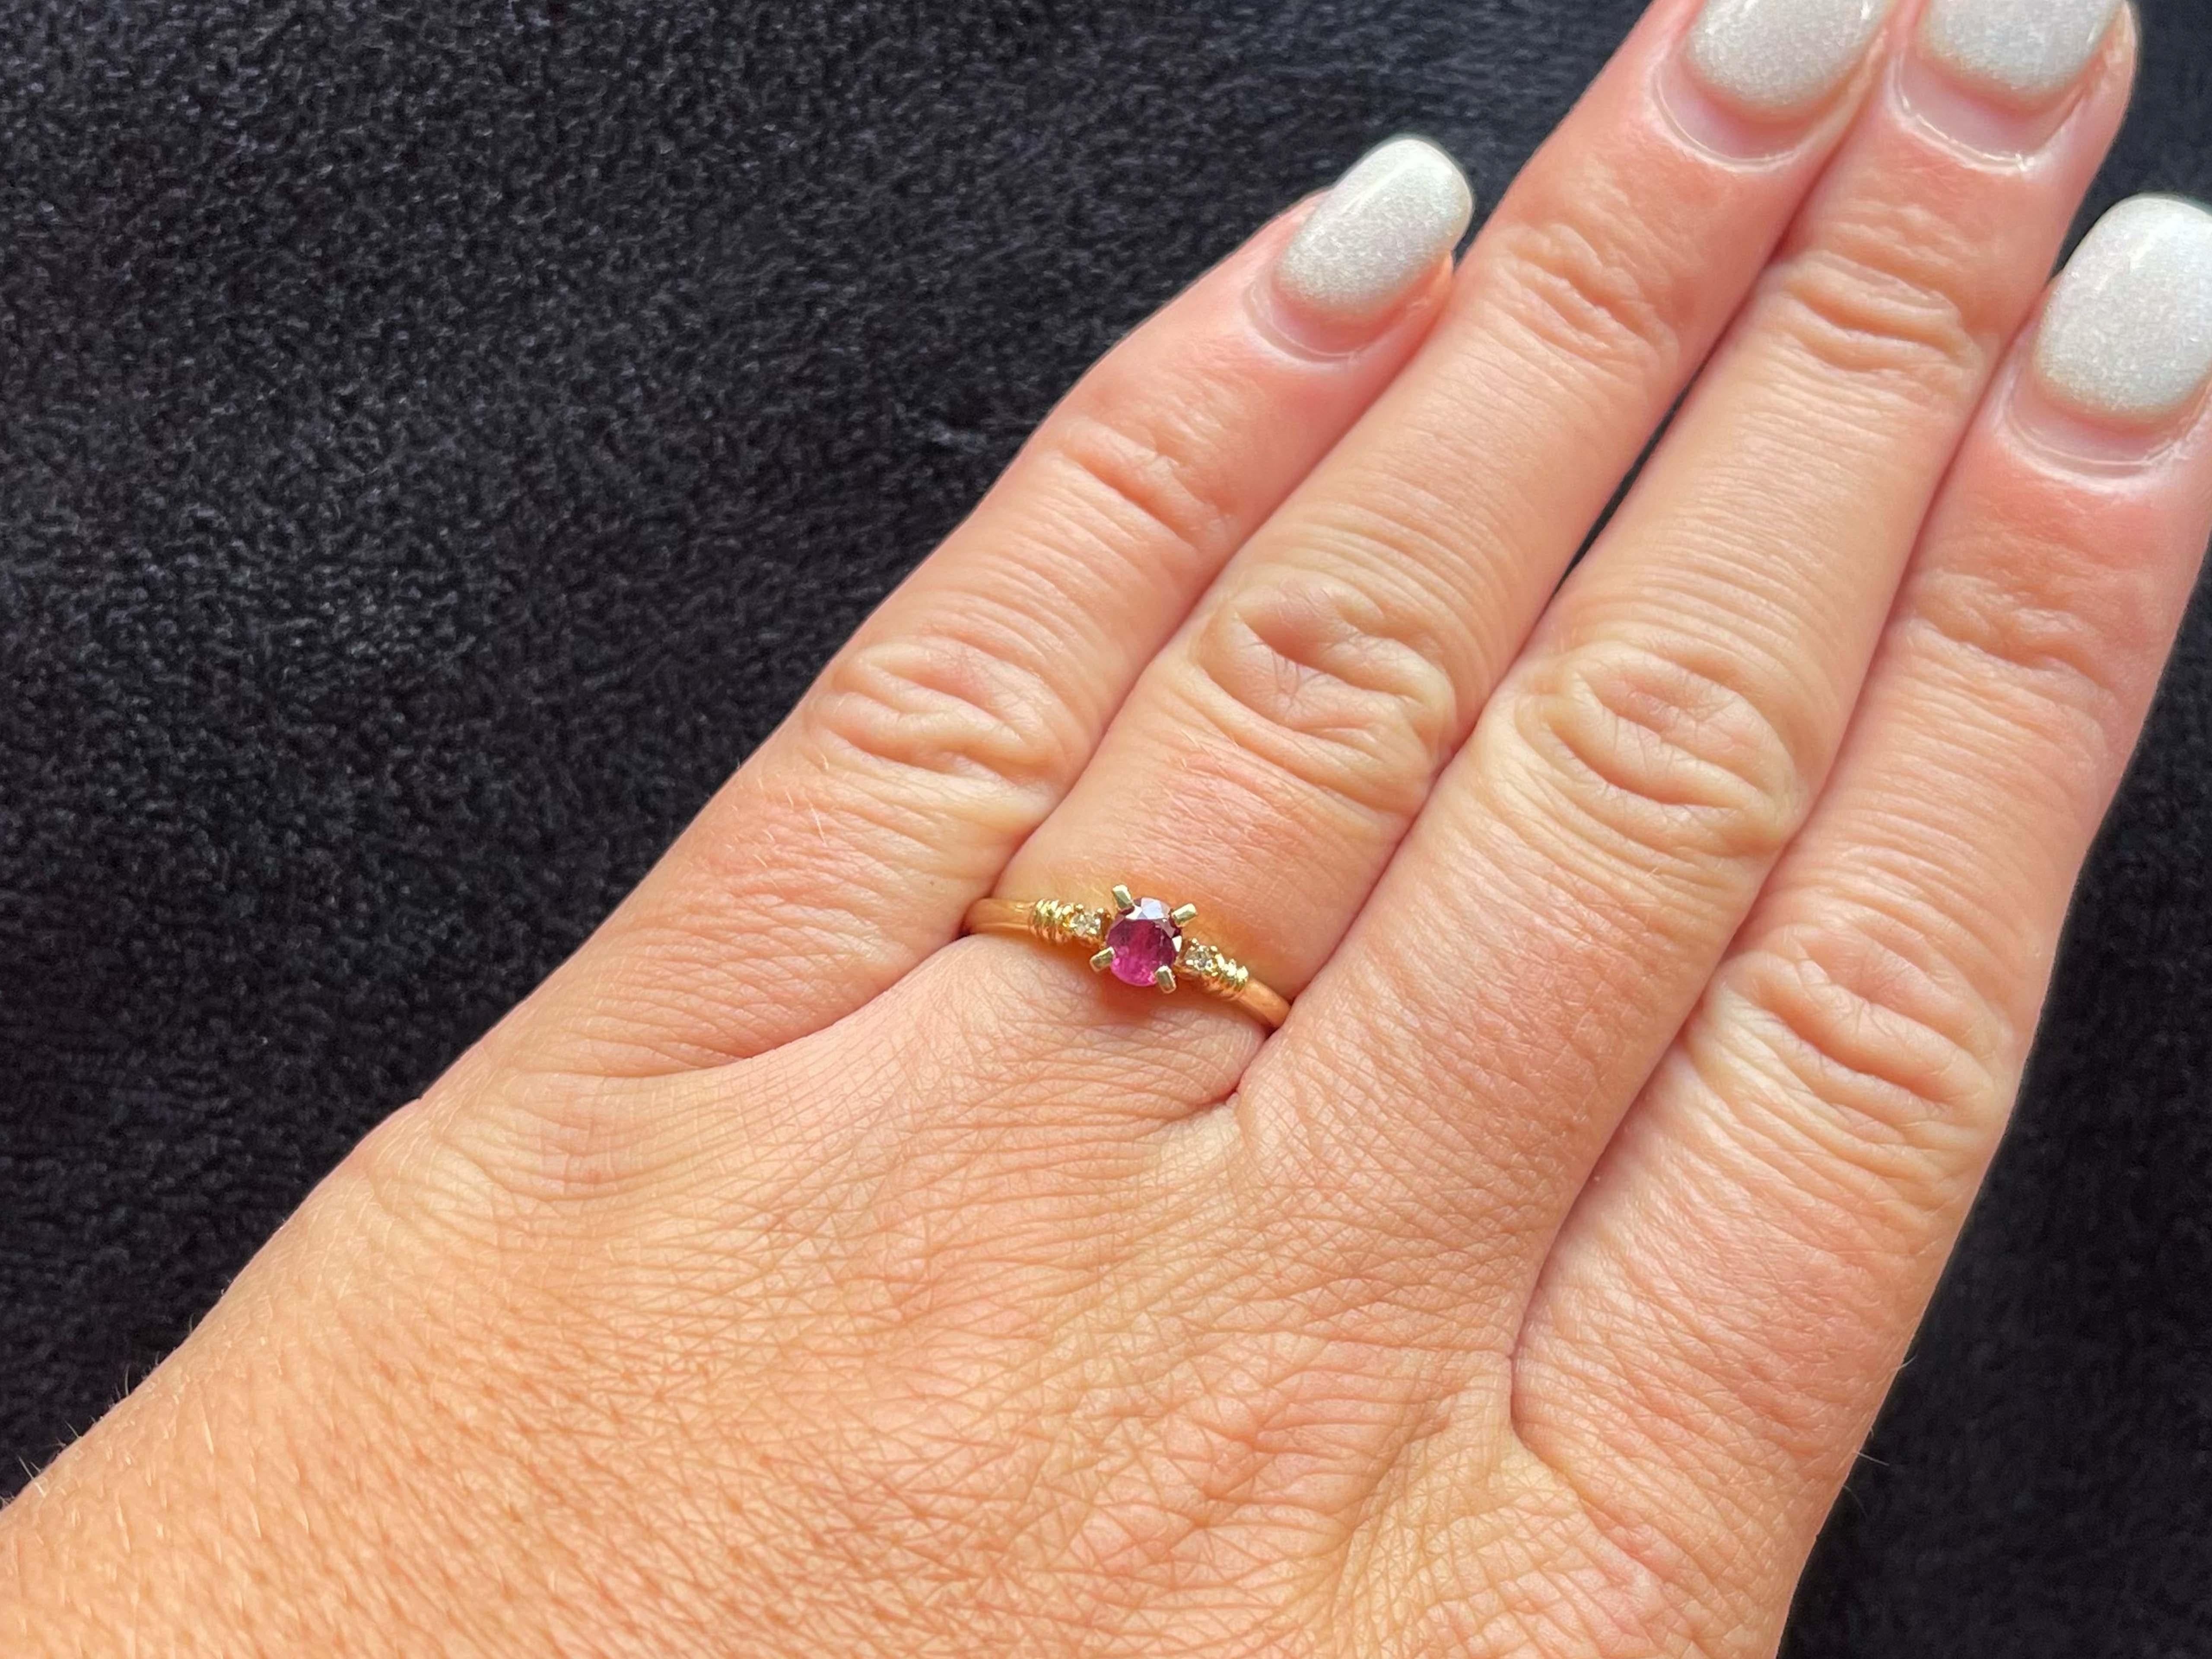 Item Specifications:

Metal: 14K Yellow Gold

Style: Statement Ring

Ring Size: 5.75 (resizing available for a fee)

Total Weight: 1.6 Grams

Gemstone Specifications:

Gemstones: 1 oval red ruby

Ruby Carat Weight: 0.20 carats

Diamond Carat Weight: